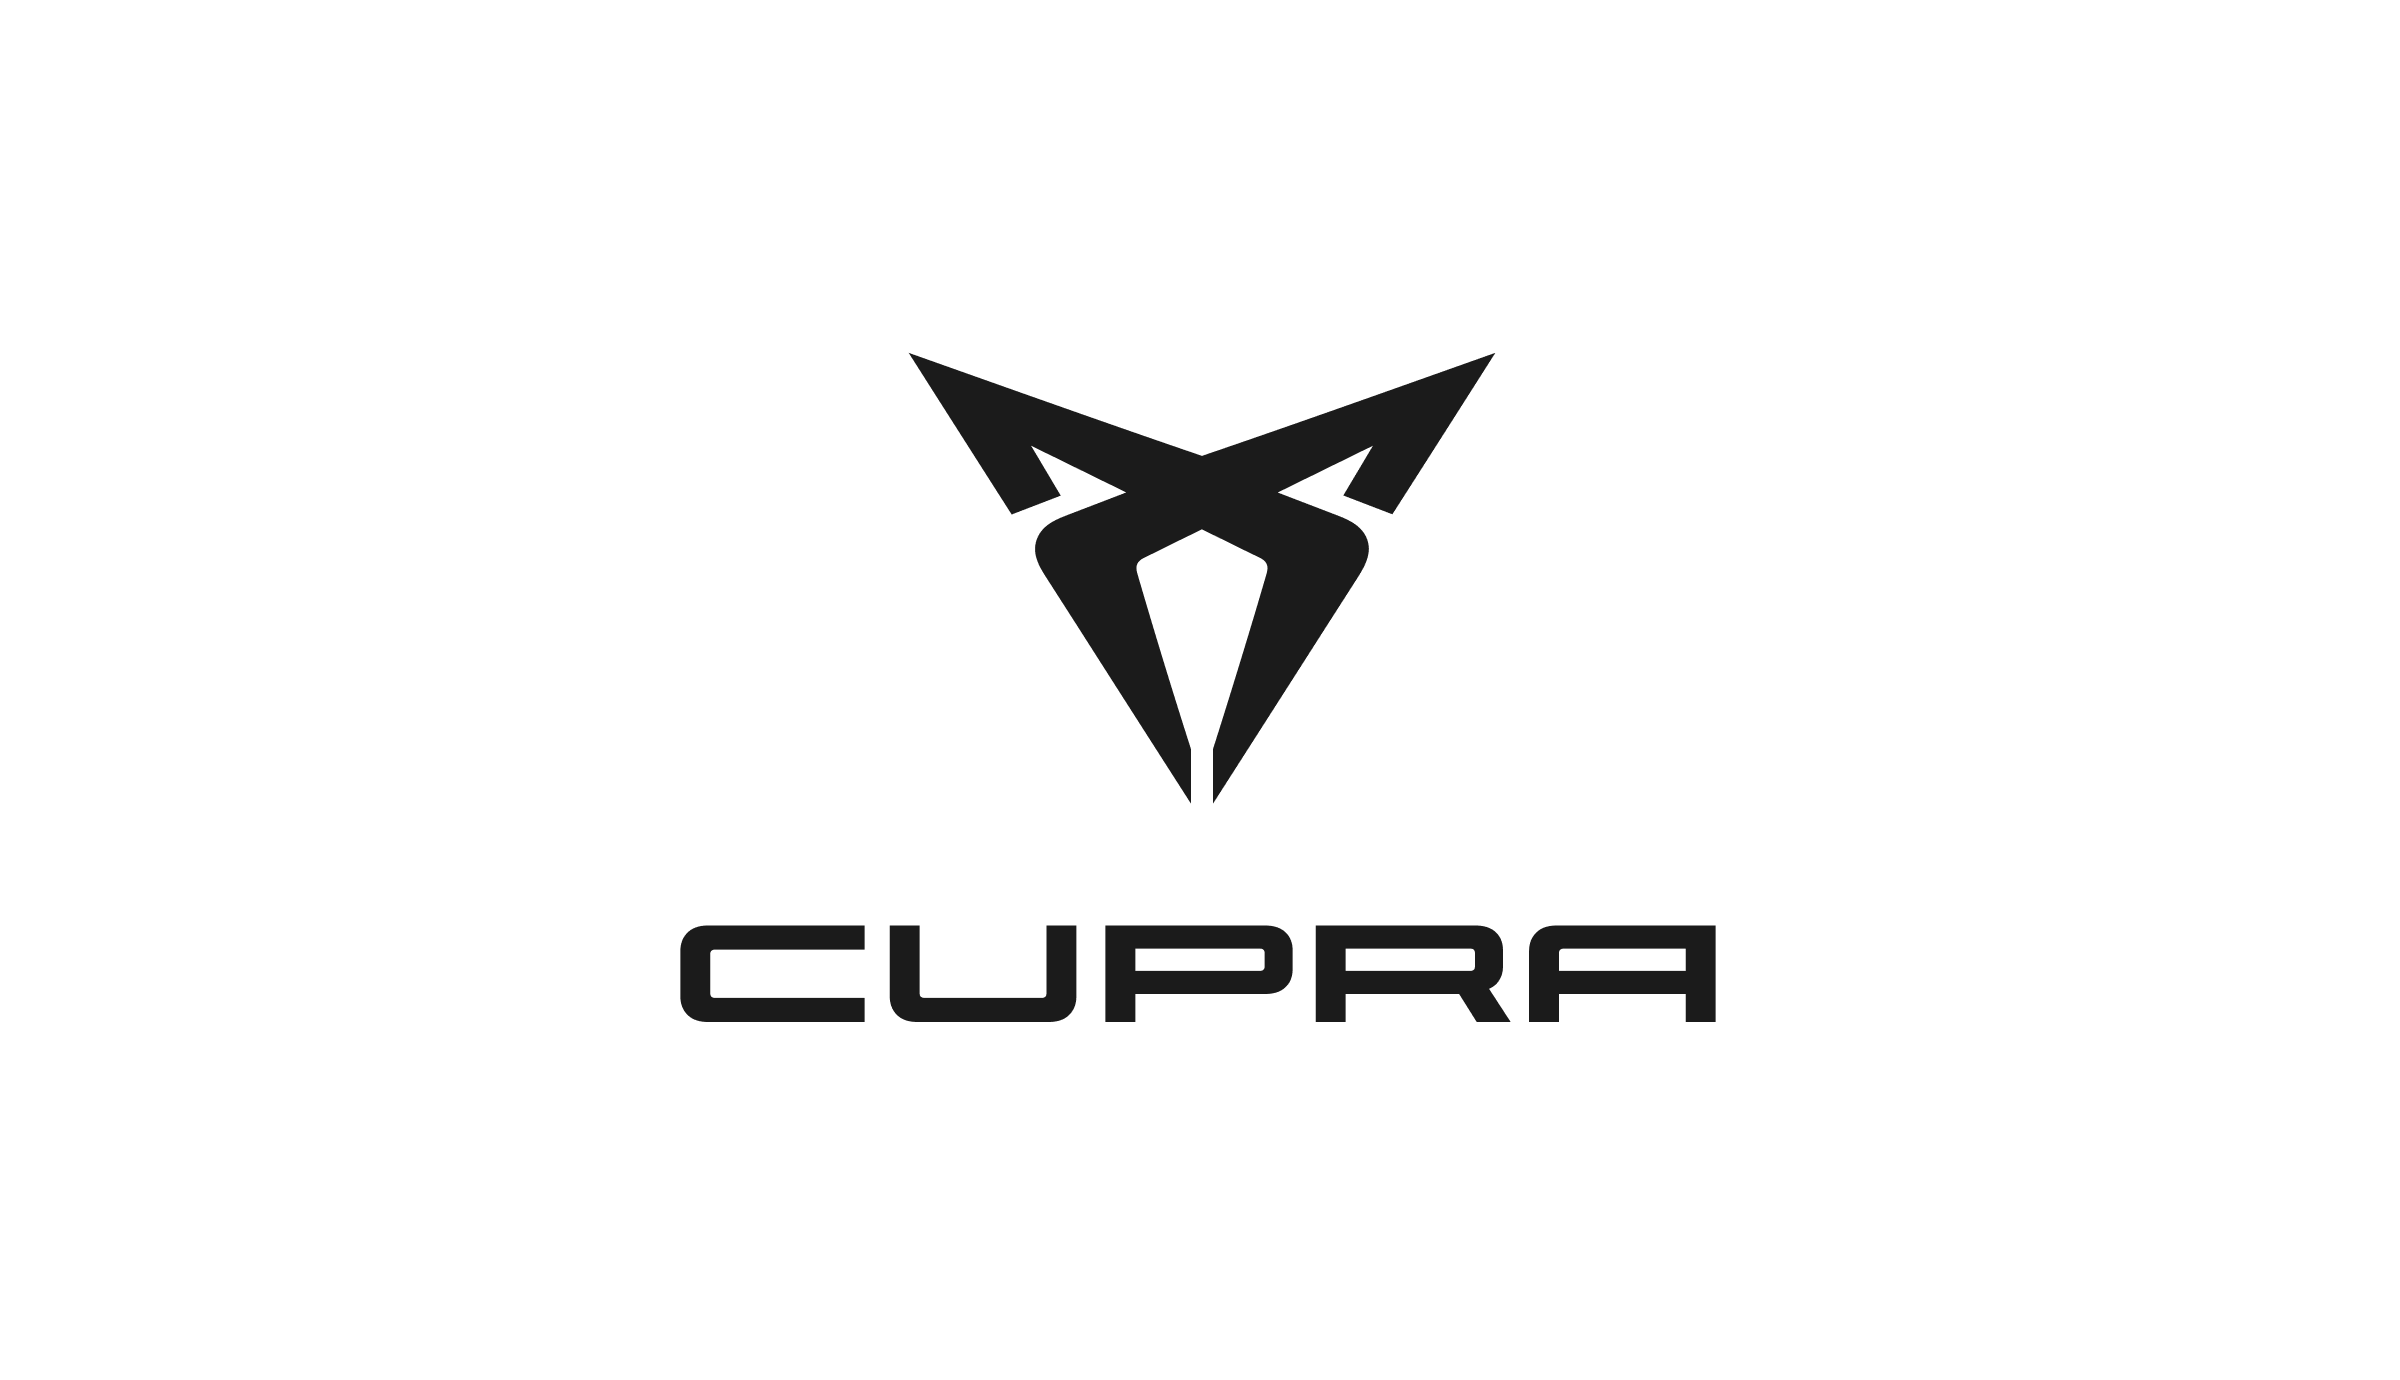 Lifestyle and A Sports | Passion a with for Racing Brand Car CUPRA